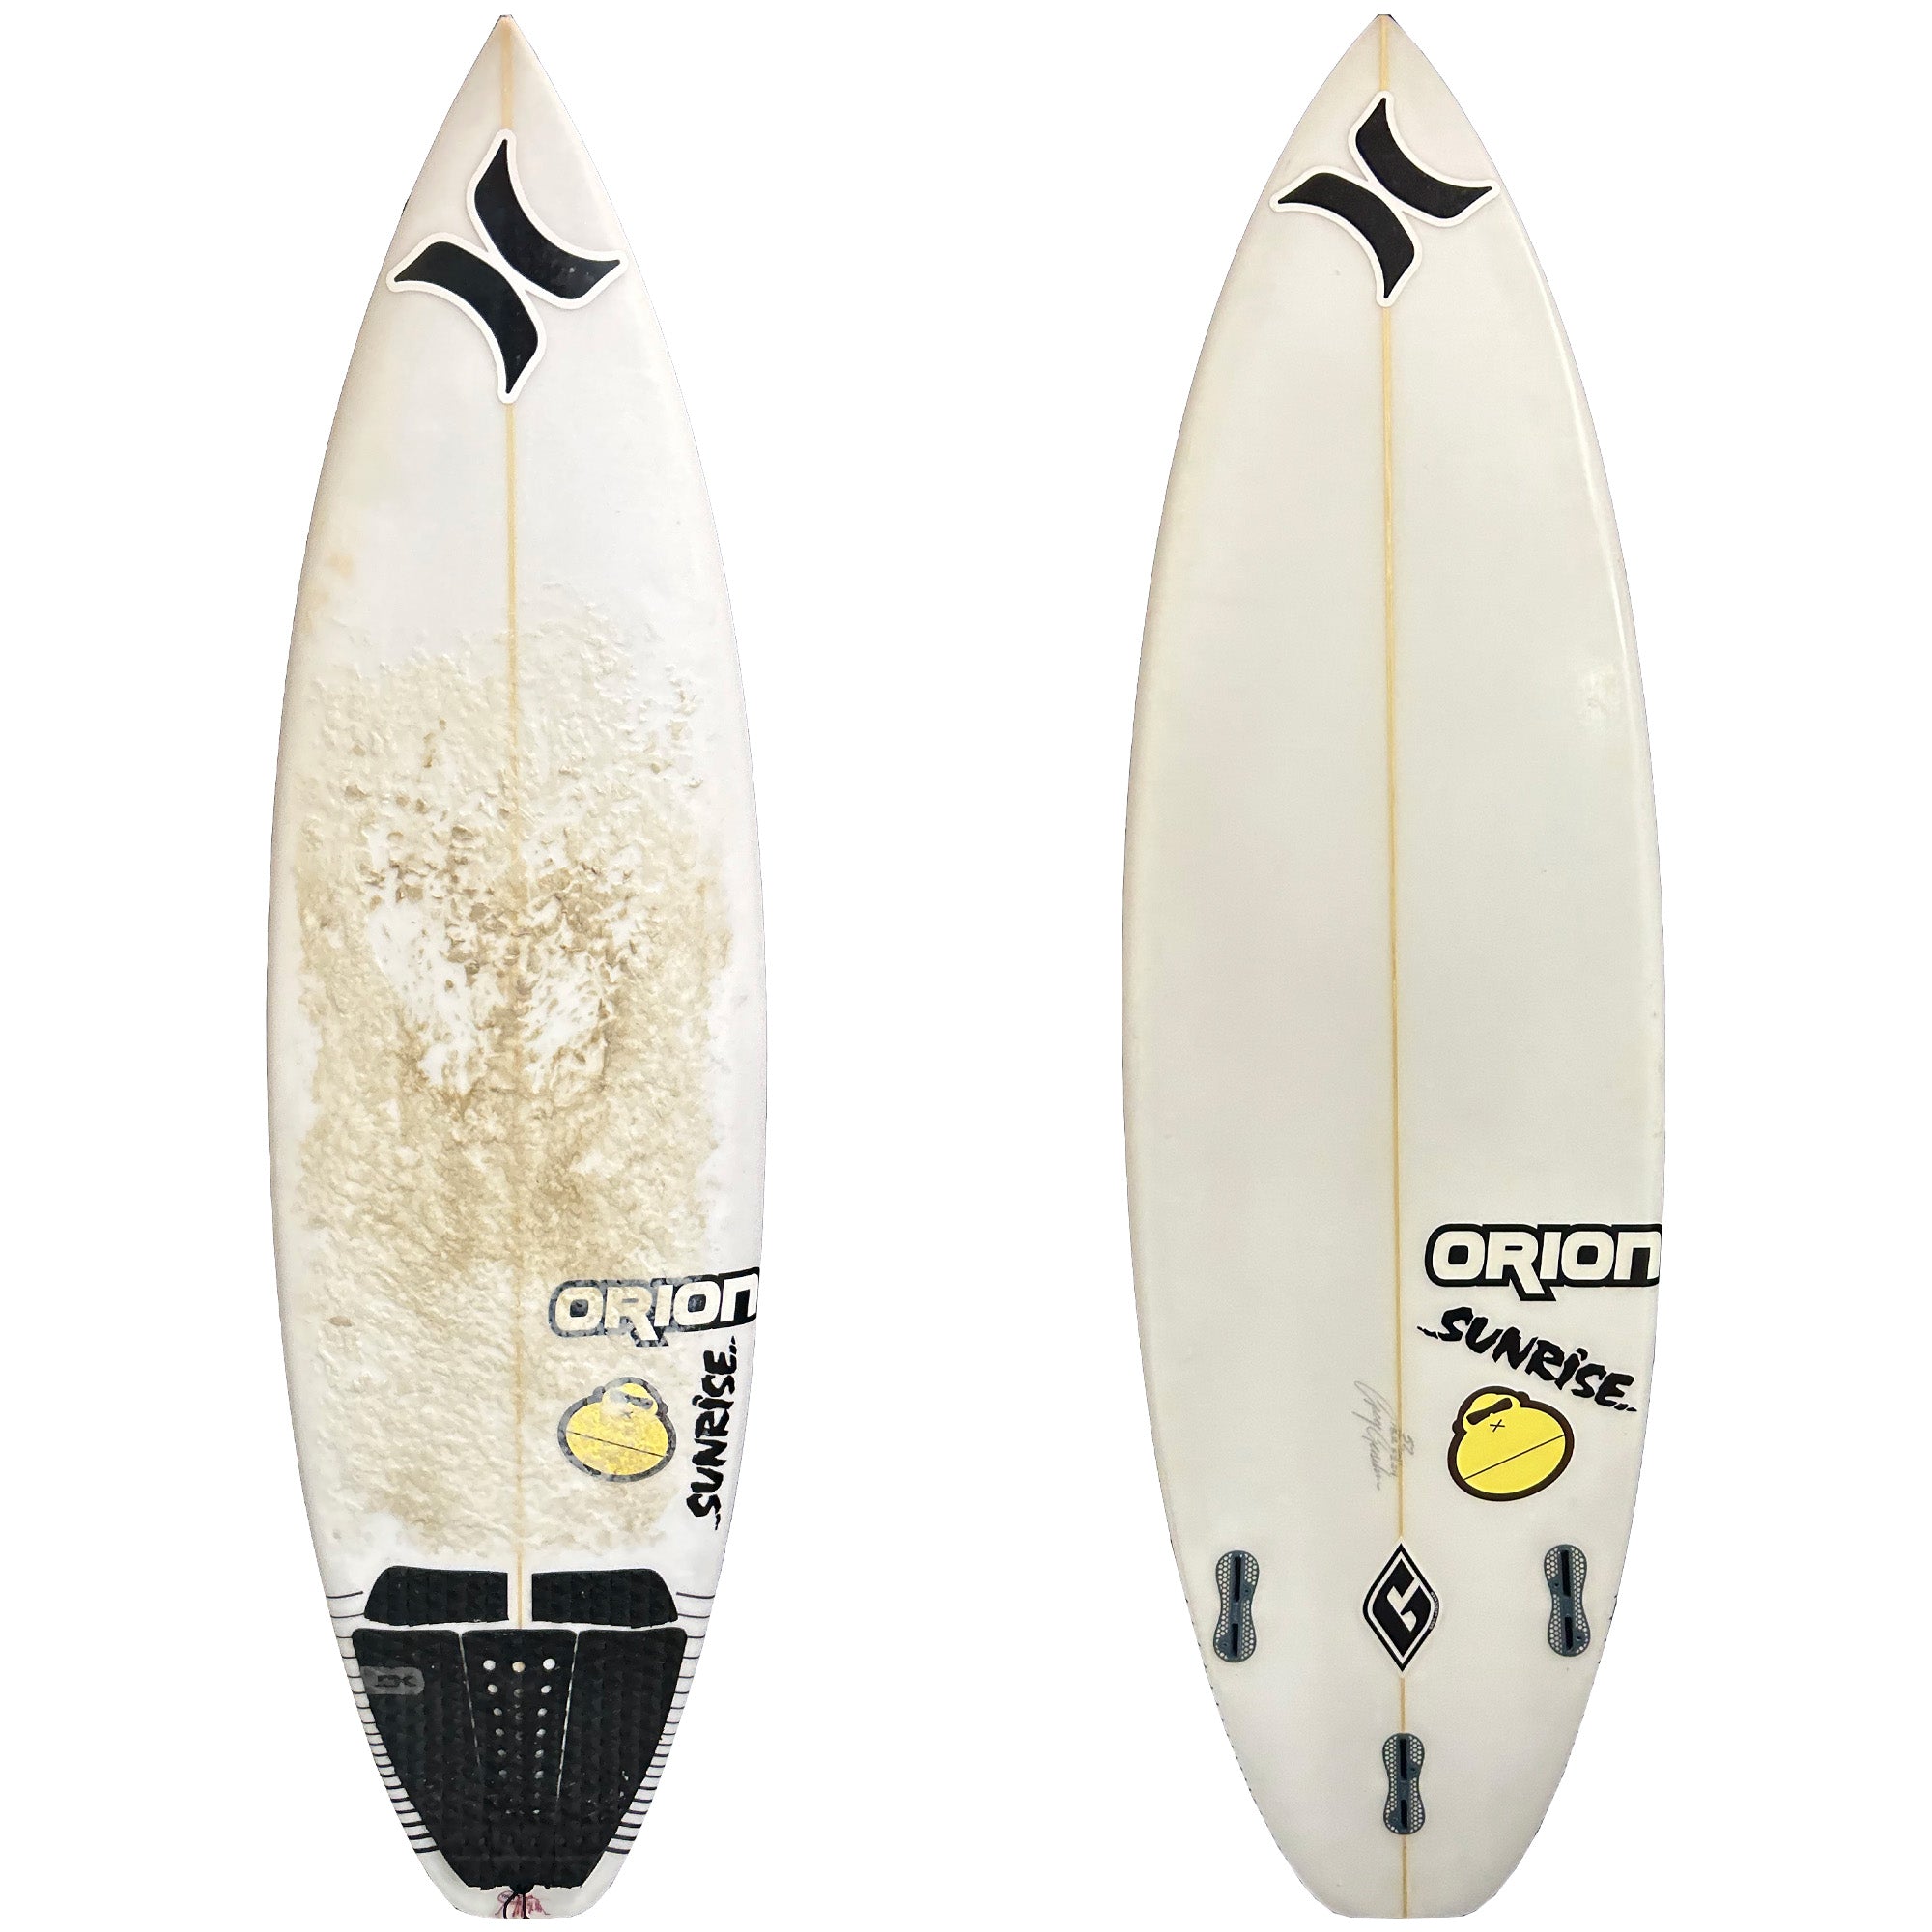 Orion 5'7 Consignment Surfboard